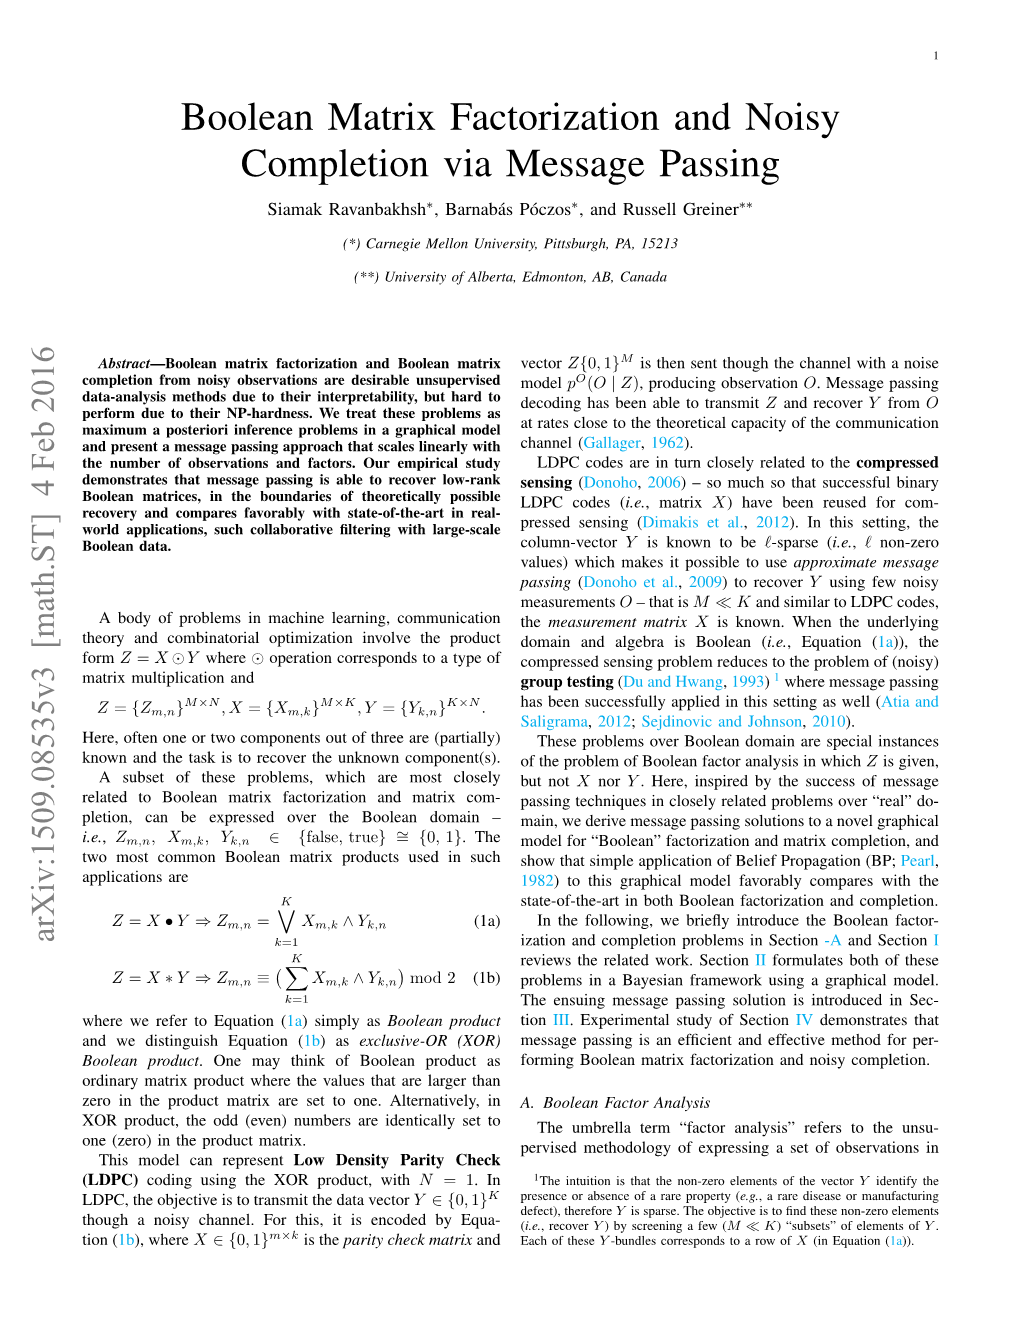 Boolean Matrix Factorization and Noisy Completion Via Message Passing Siamak Ravanbakhsh∗, Barnabas´ Poczos´ ∗, and Russell Greiner∗∗